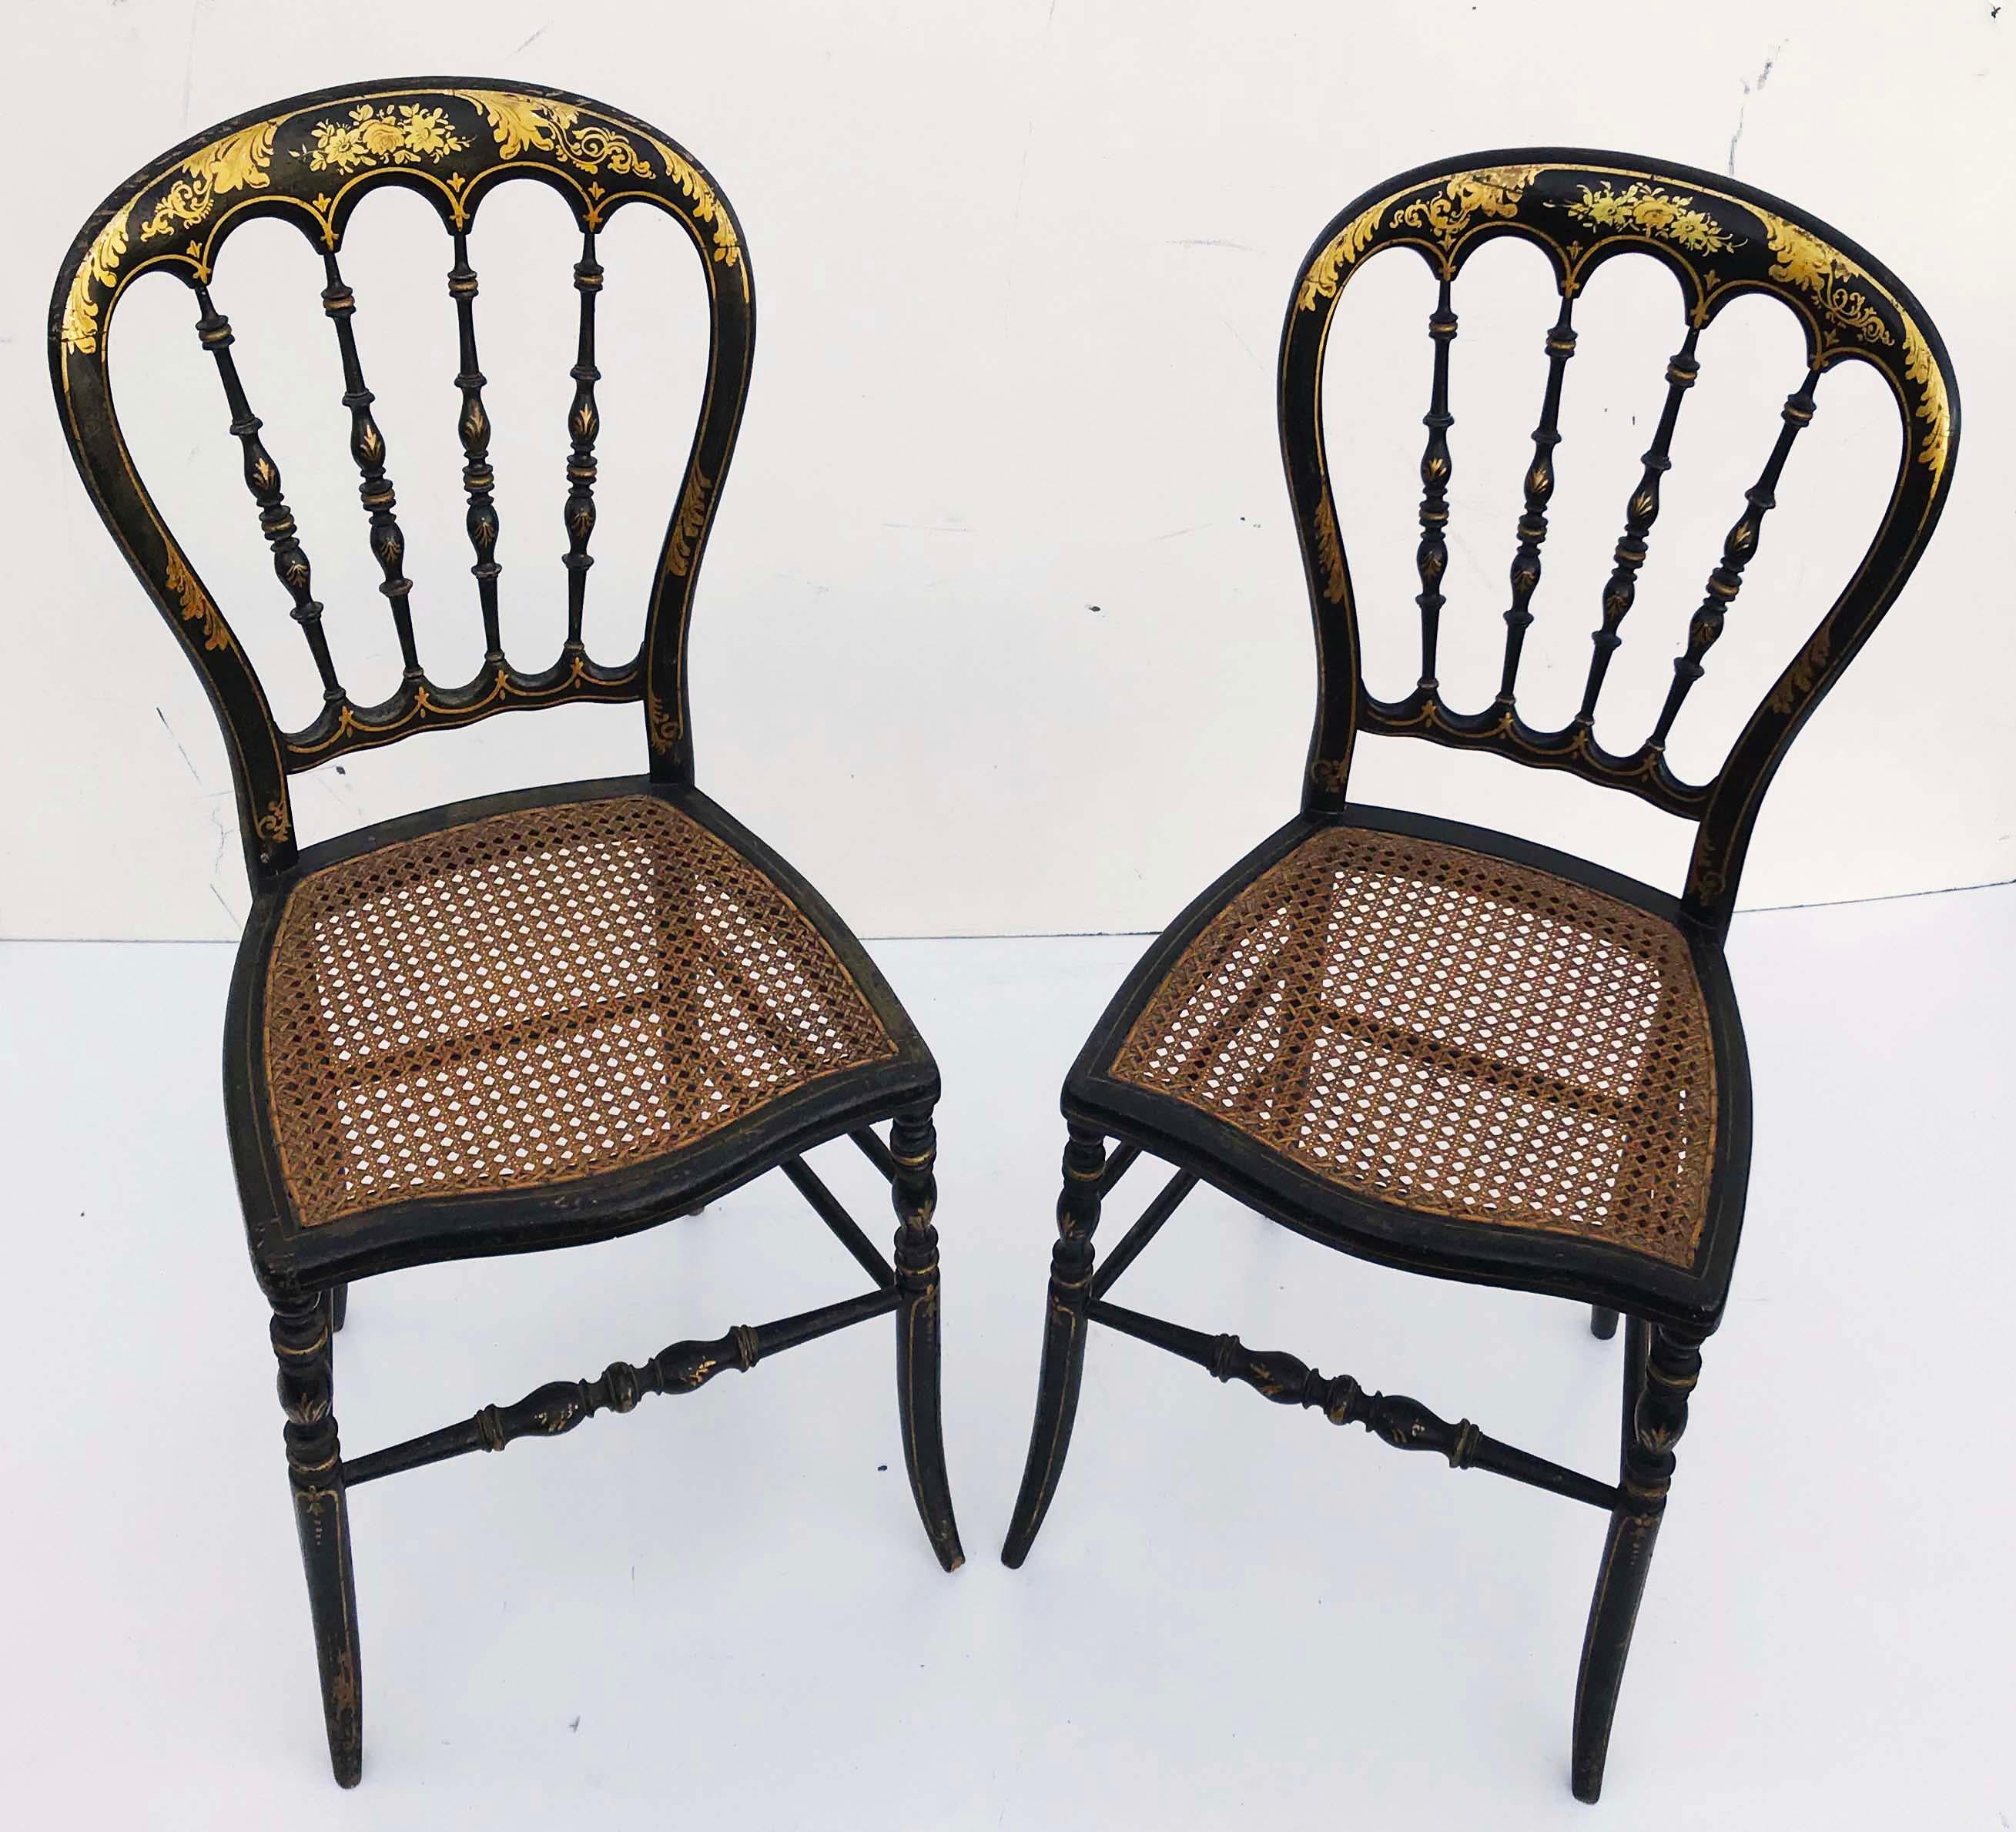 Superb pair of side chair or bedroom chairs Napoleon III period
Cane seat in very good condition, hand paint decor.

Measures: Seat 15